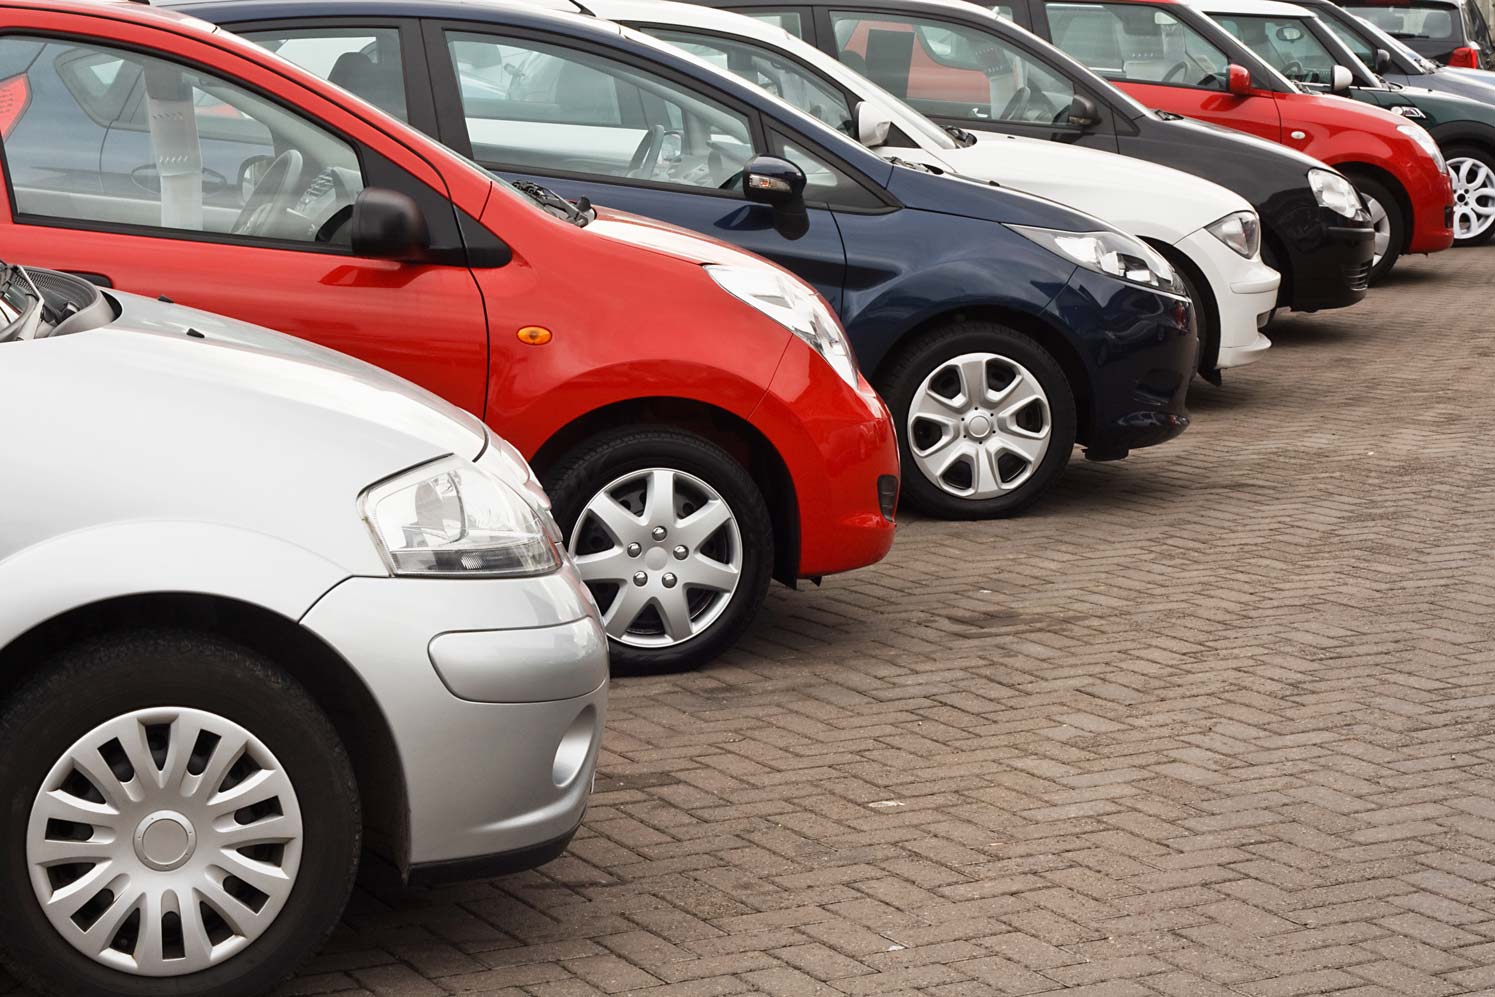 Buying a Used Car? Here's What You Need to Do